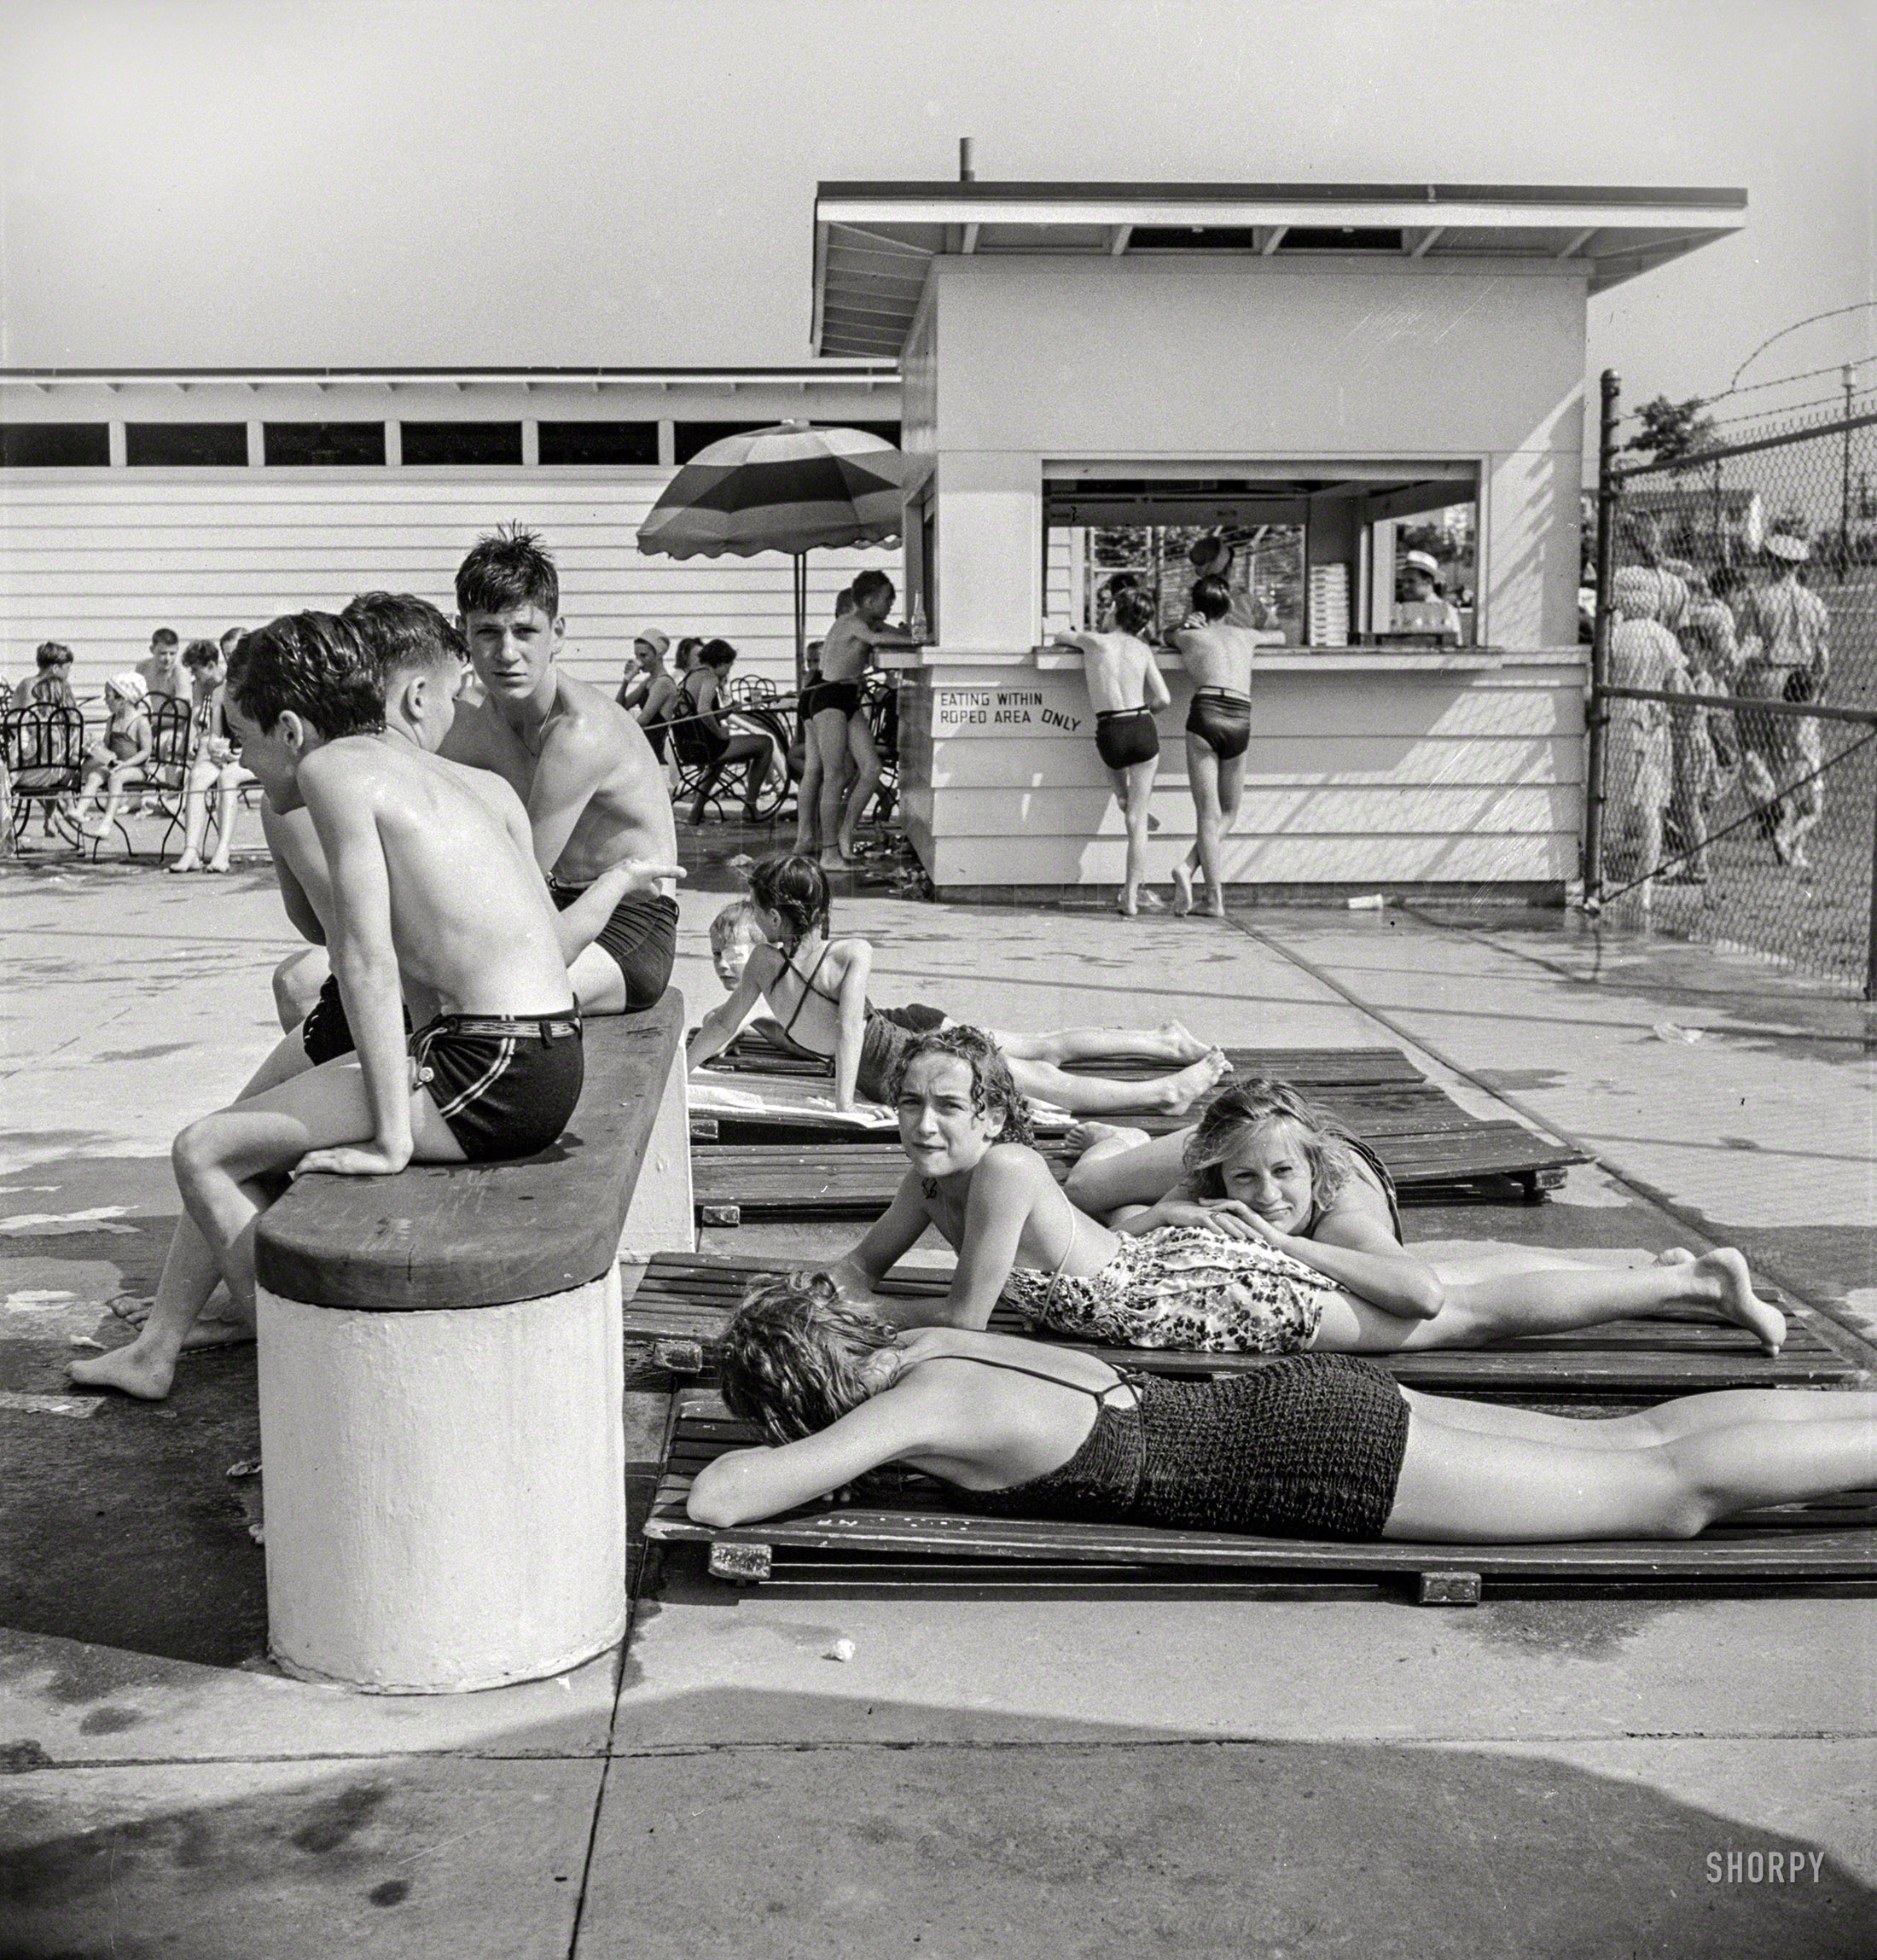 June 1942. Greenbelt, Maryland. "Sunbathers at the swimming pool." Medium format negative by Marjory Collins, Office of War Information. View full size.